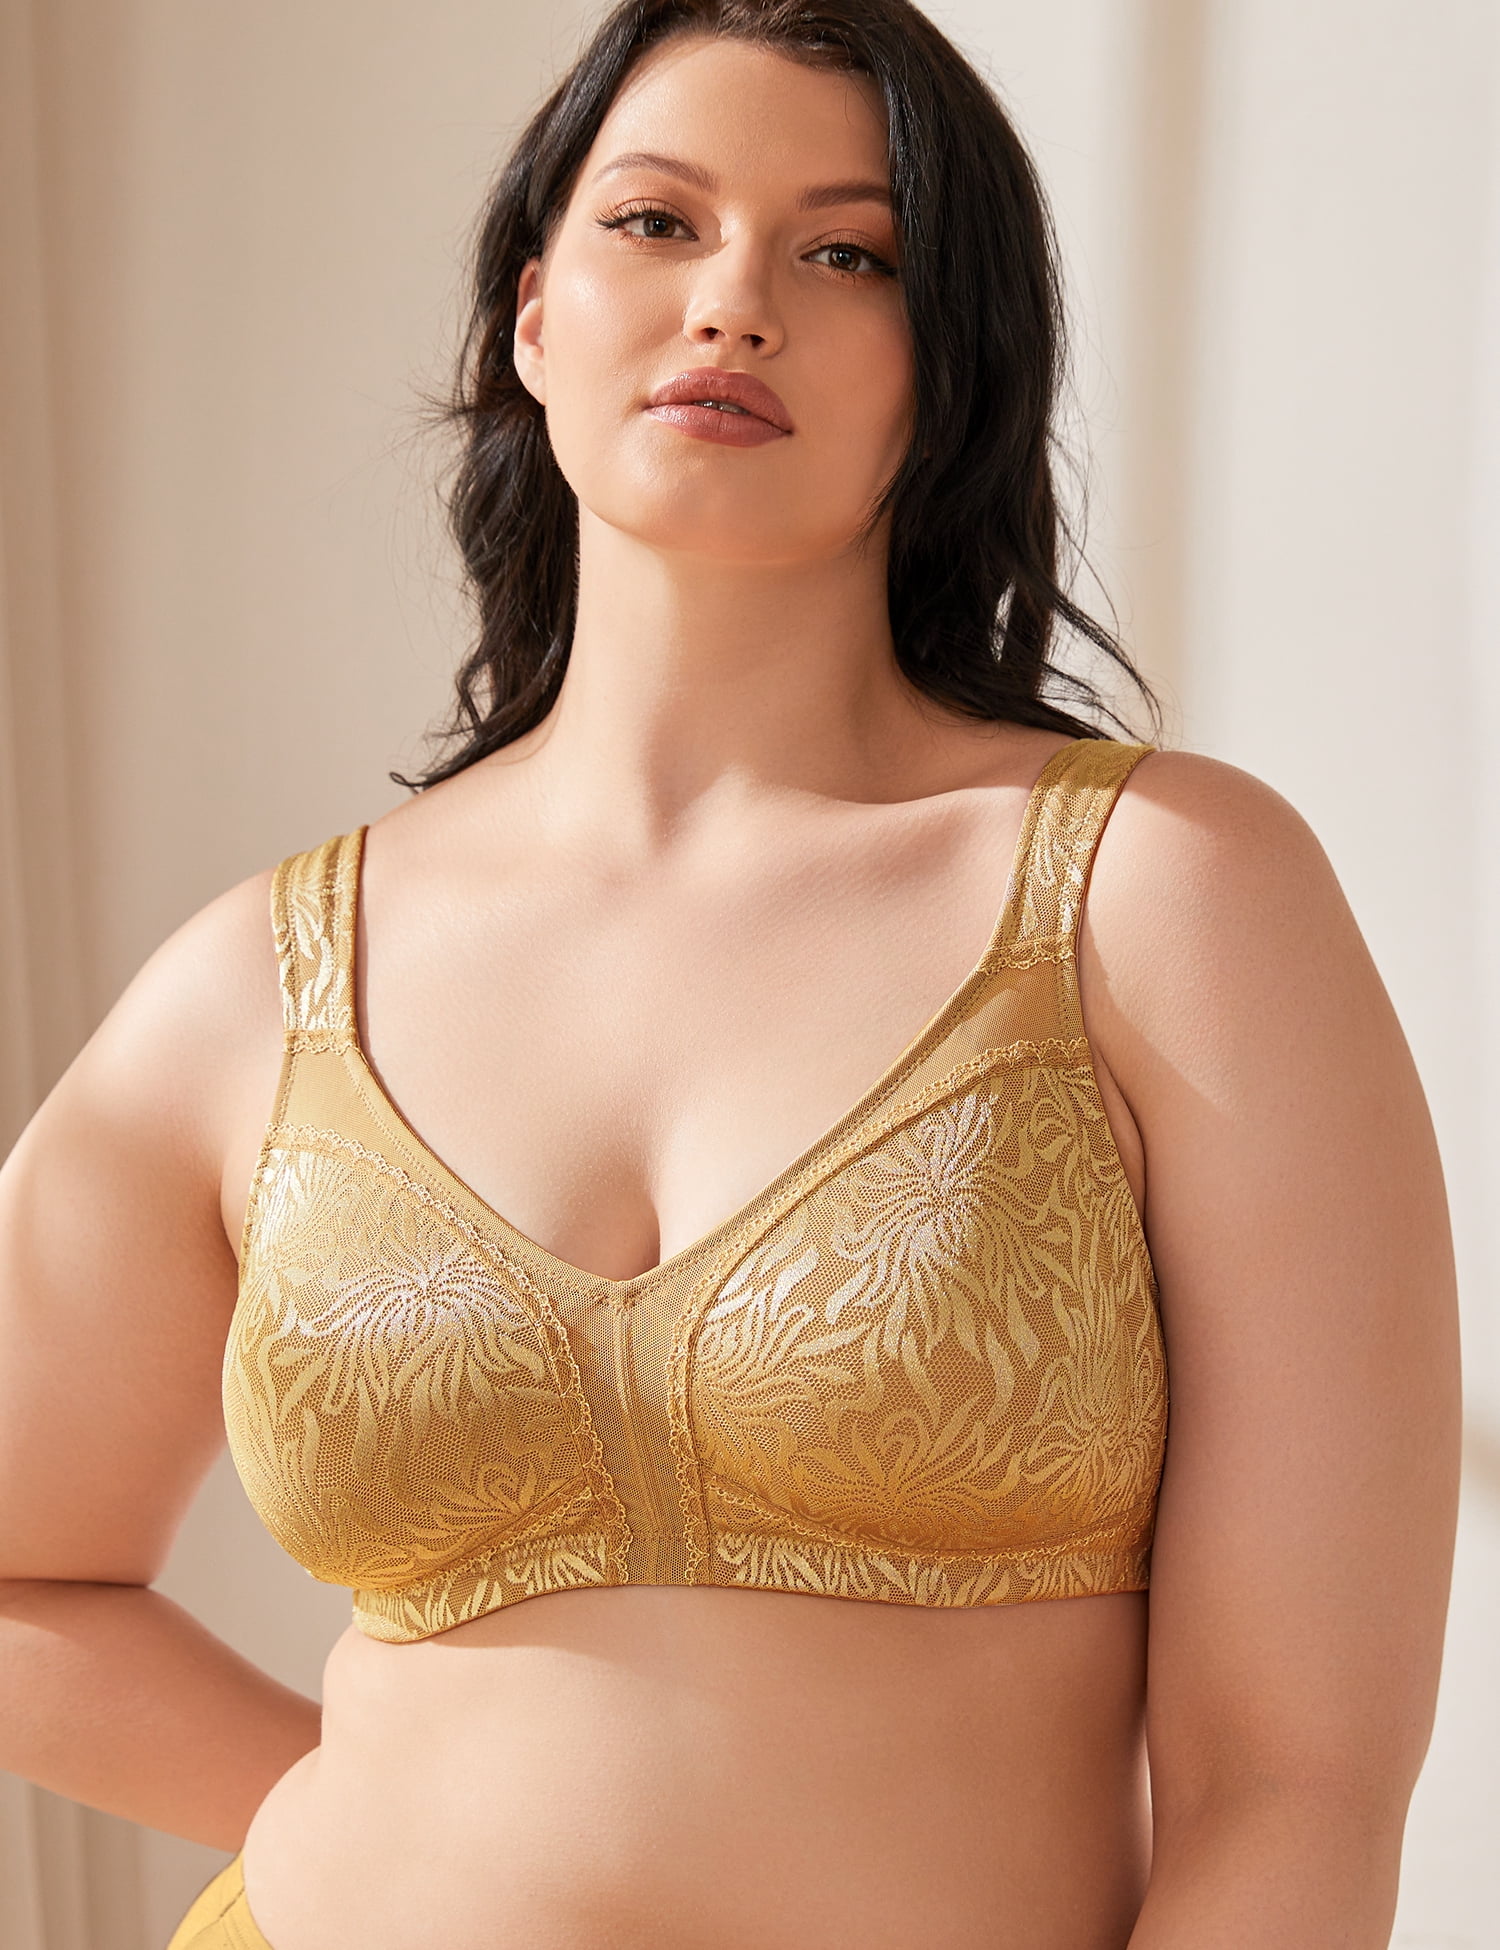 Wingslove's Breast Minimizer Bra Full Coverage Wirefree Plus Size Non  Padded Lingerie - Price history & Review, AliExpress Seller - WingsLove  Official Store